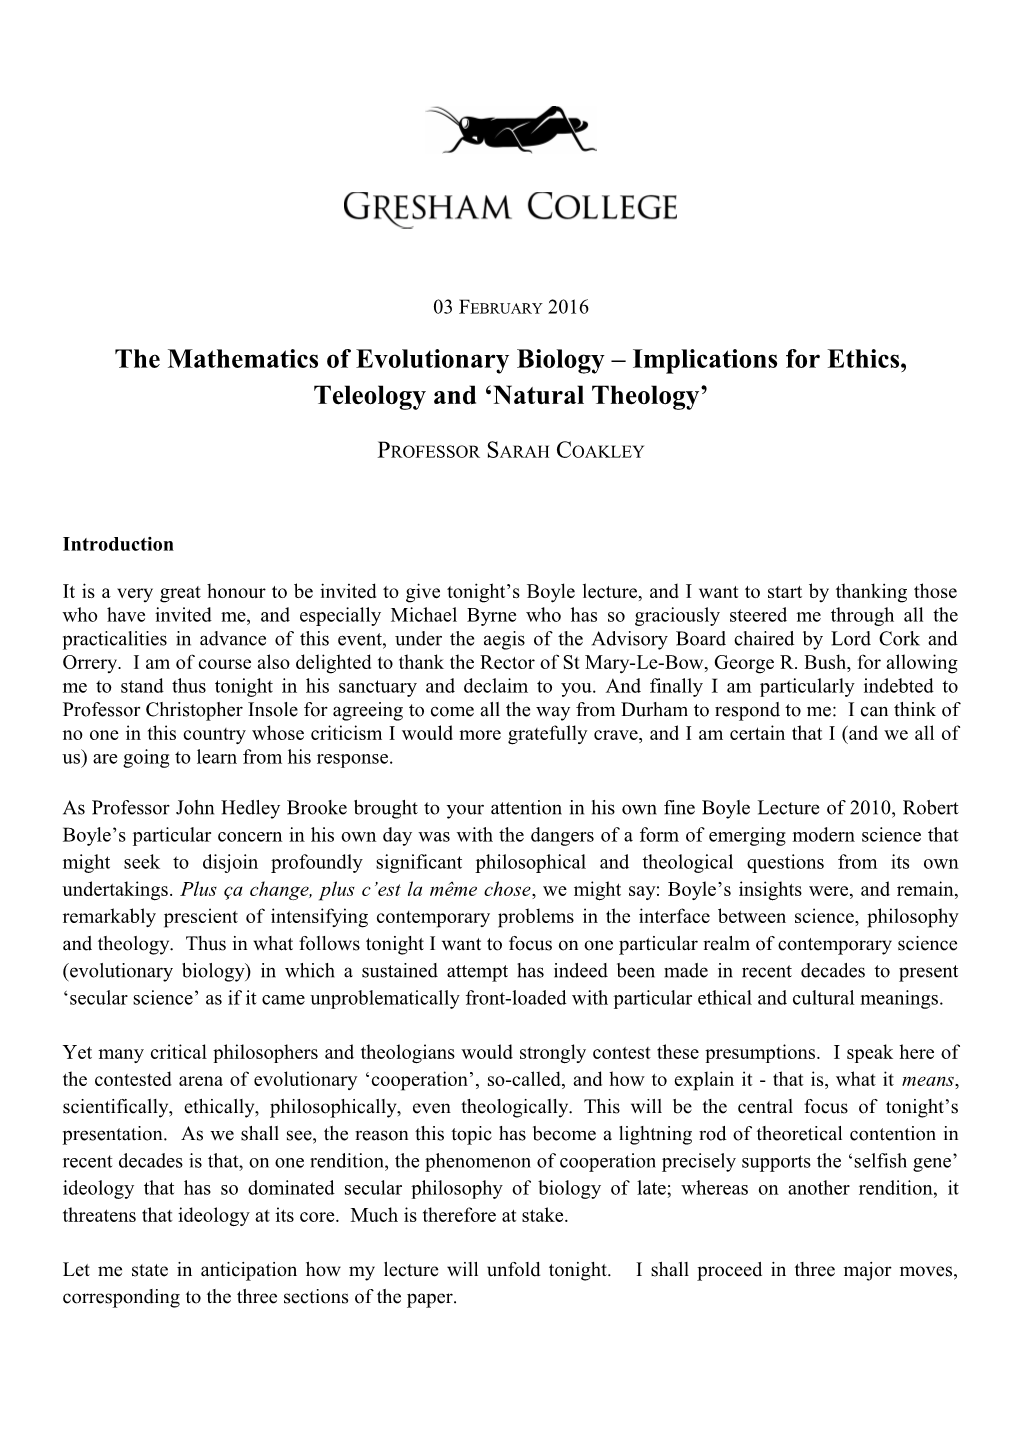 The Mathematics of Evolutionary Biology Implications for Ethics, Teleology and Natural